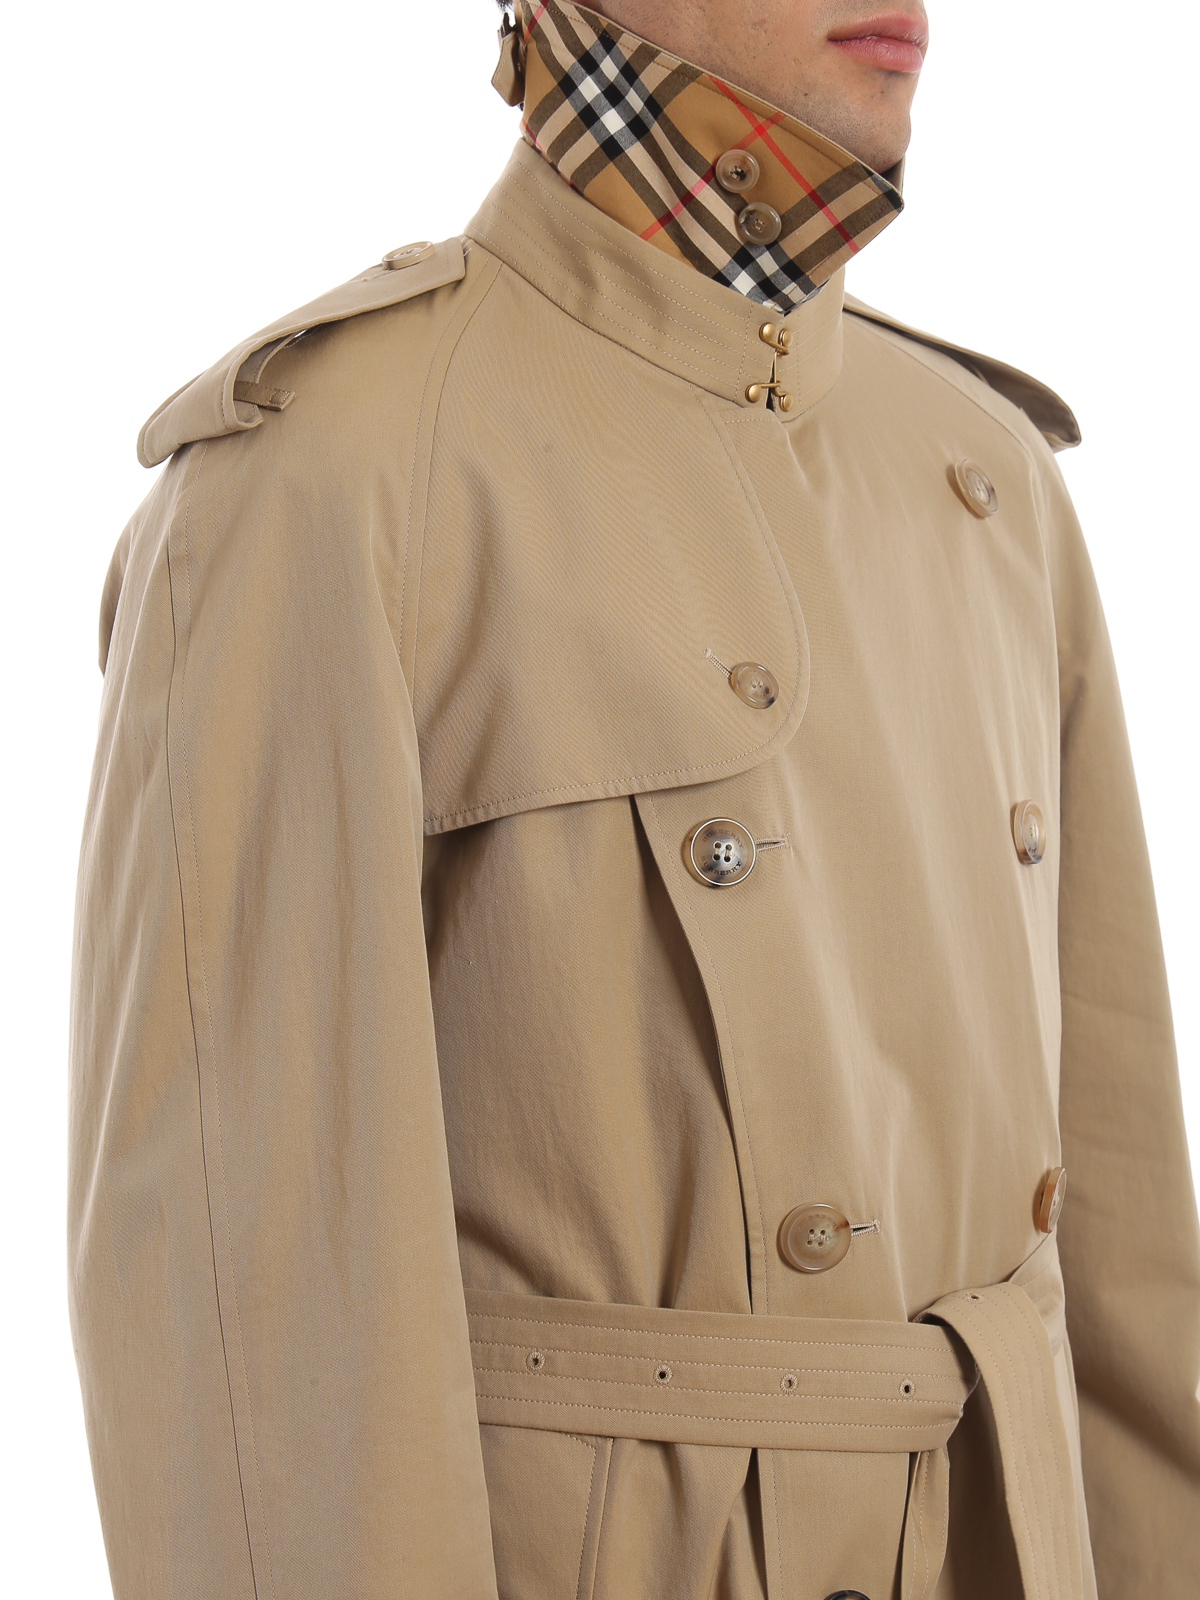 burberry westminster trench coat womens